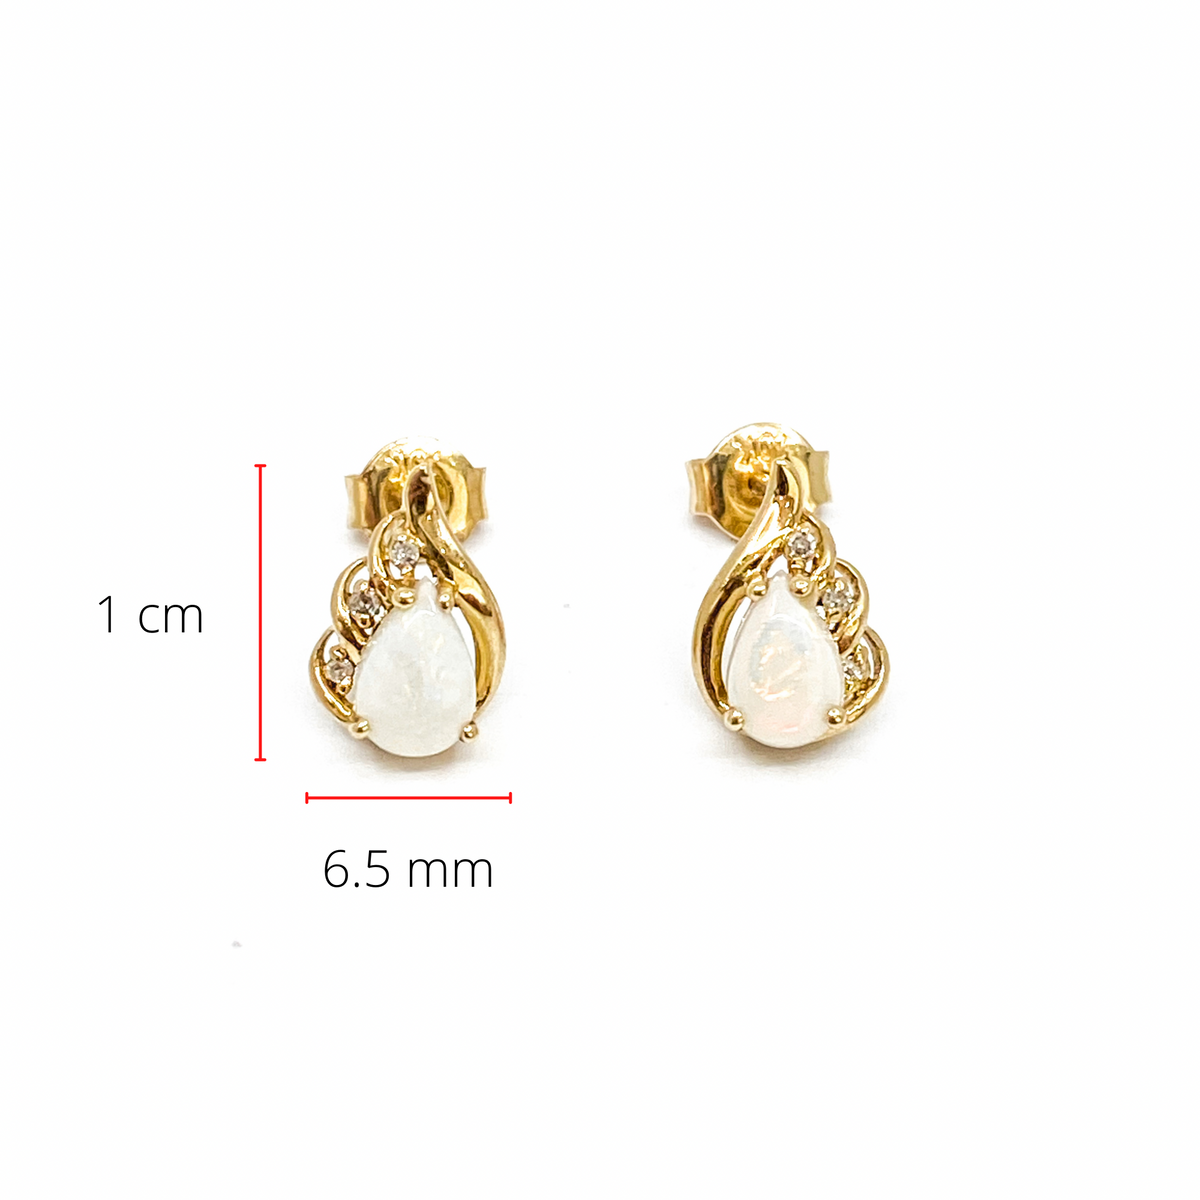 10K Yellow Gold 0.65cttw Genuine Opal and 0.03cttw Diamond Earrings